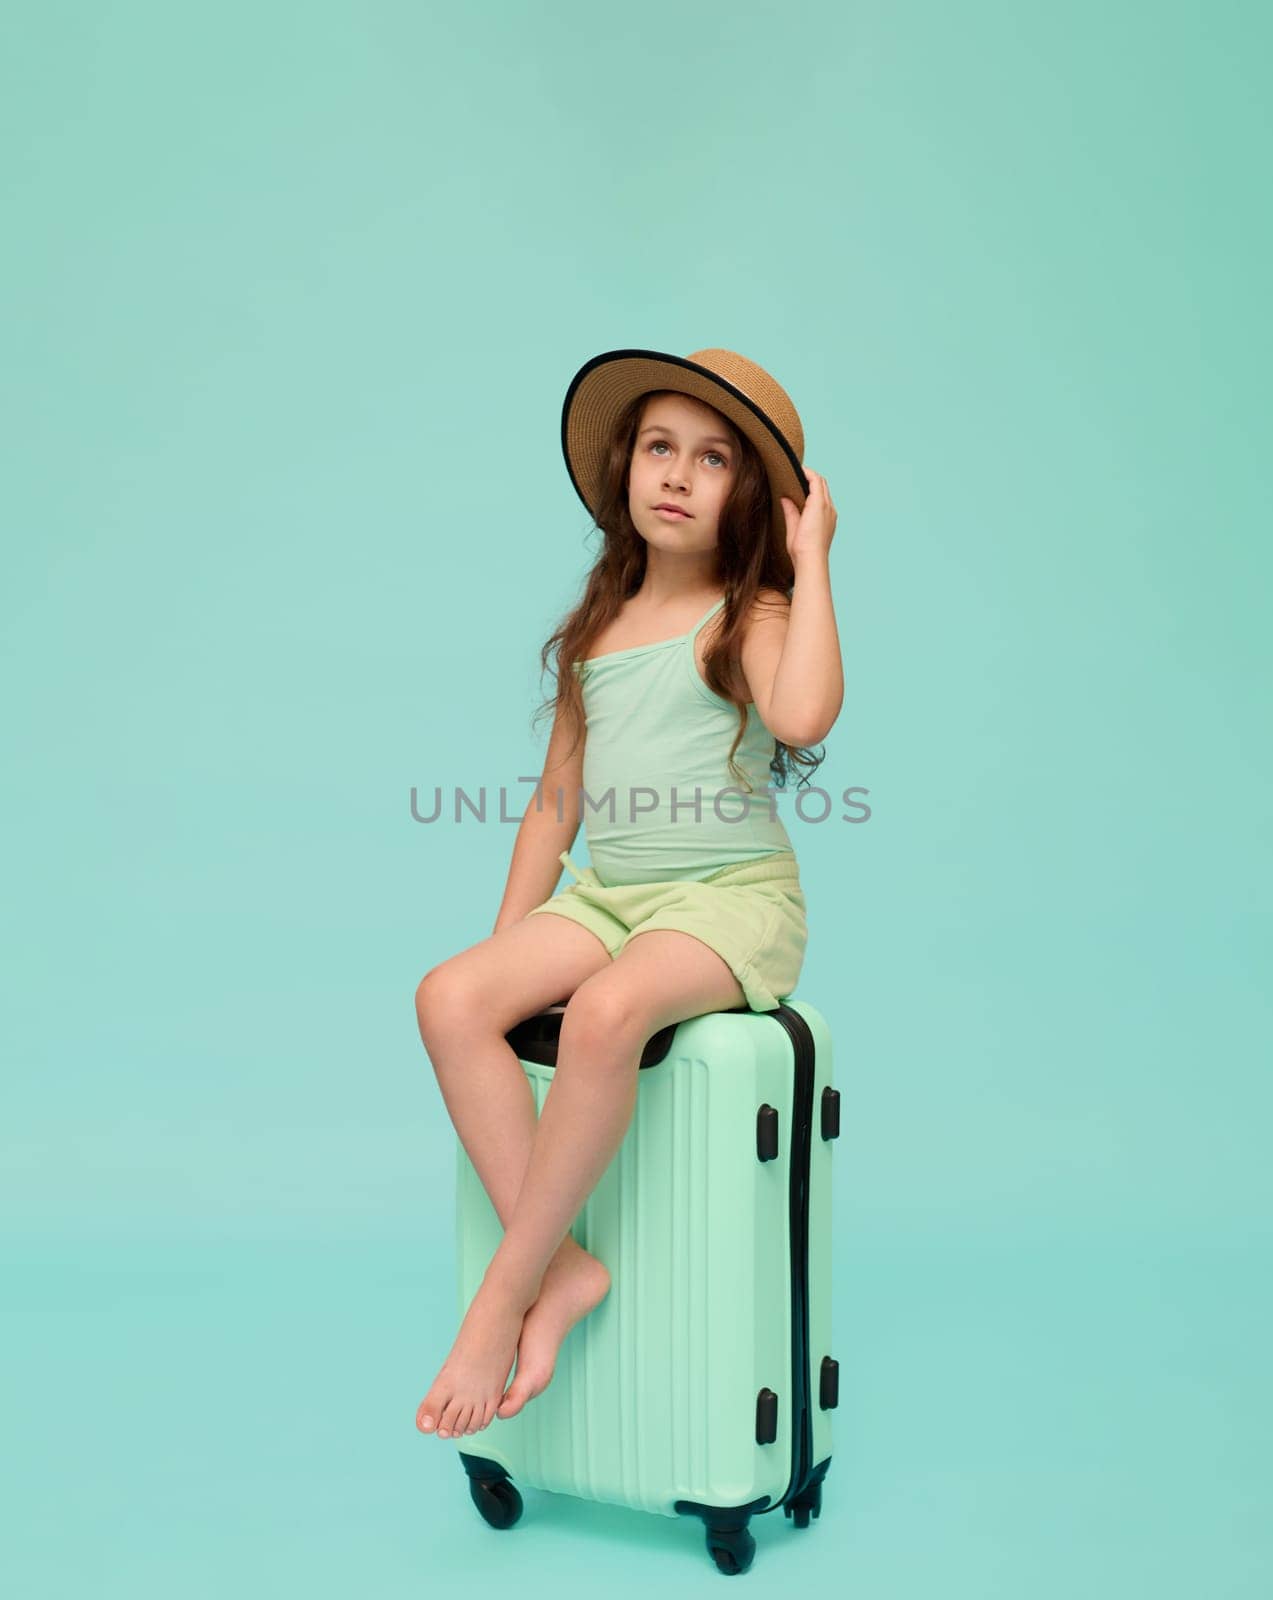 Vertical advertising portrait of a little child girl, passenger sitting on a trendy plastic valise, looking at camera, dressed in a straw hat and summer clothes, isolated over blue studio background